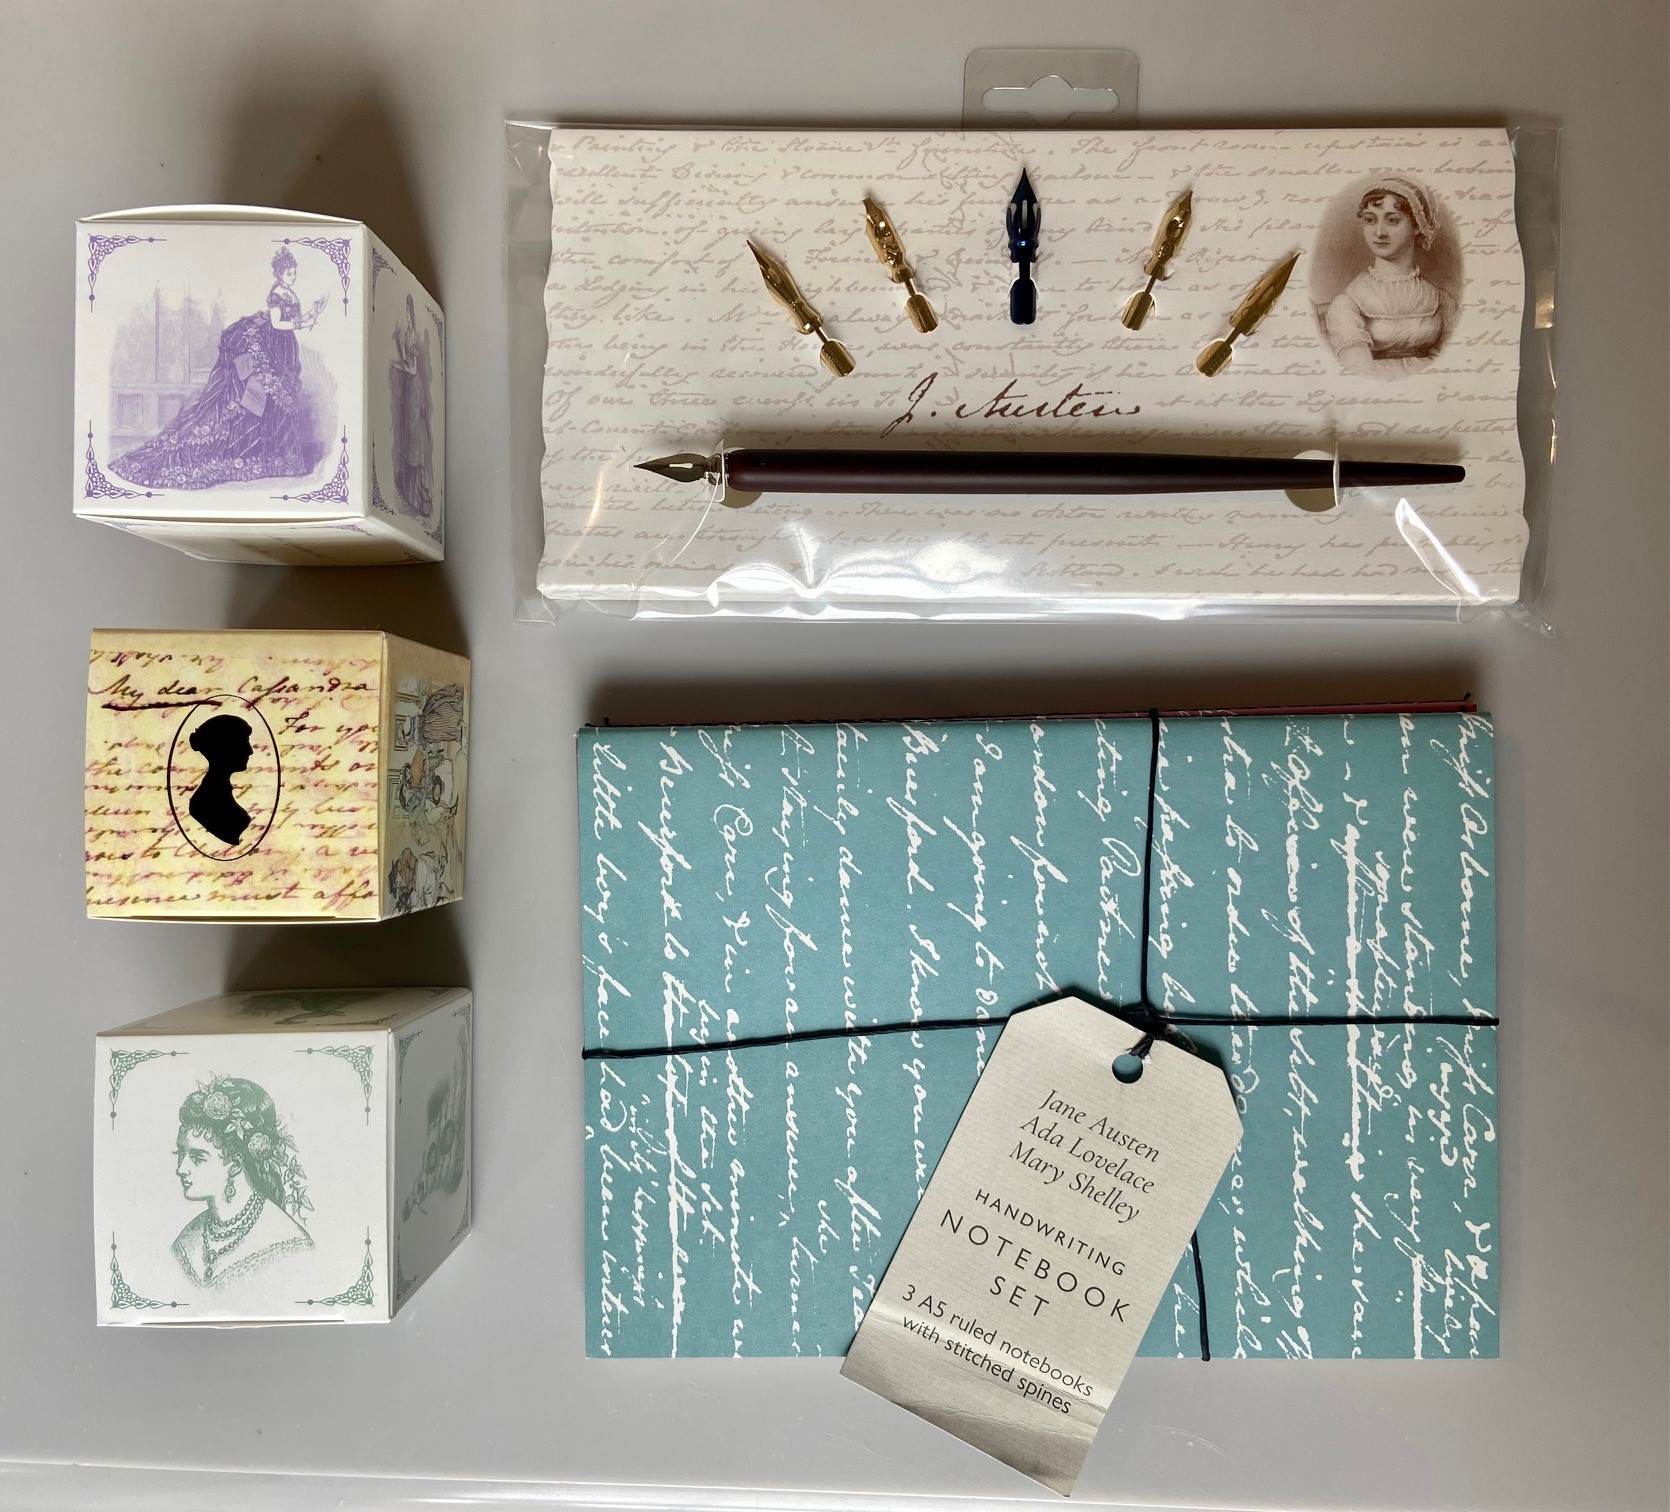 Jane Austen stationery with pens, ink and notebook